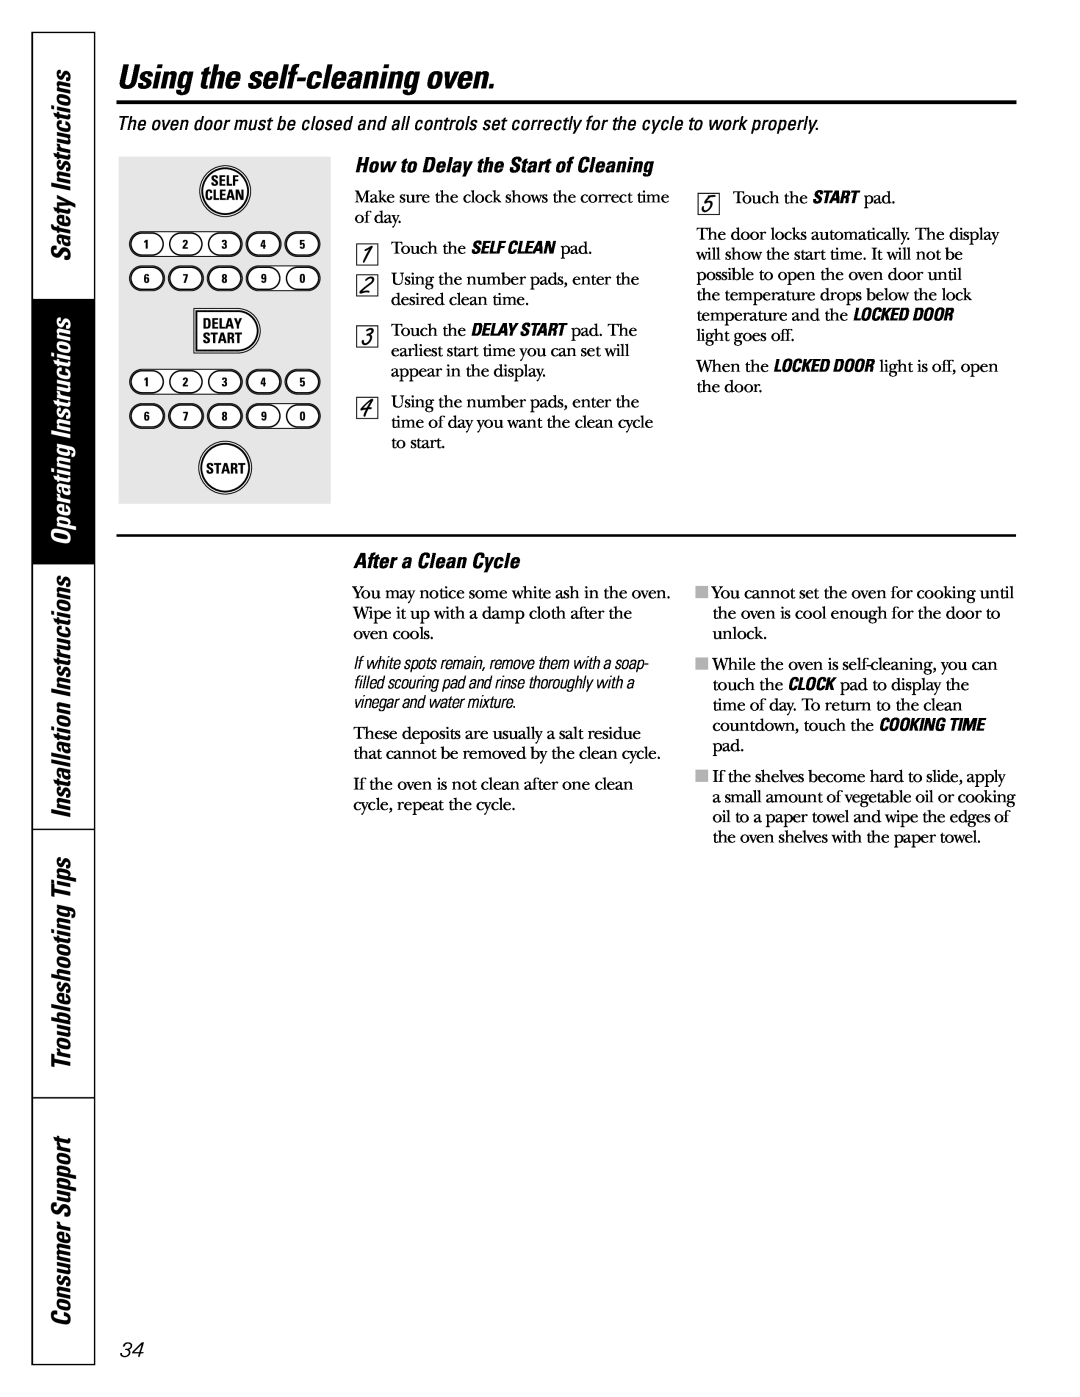 GE JGBP88, JGB918 manual Using the self-cleaning oven, After a Clean Cycle, Operating Instructions Safety 